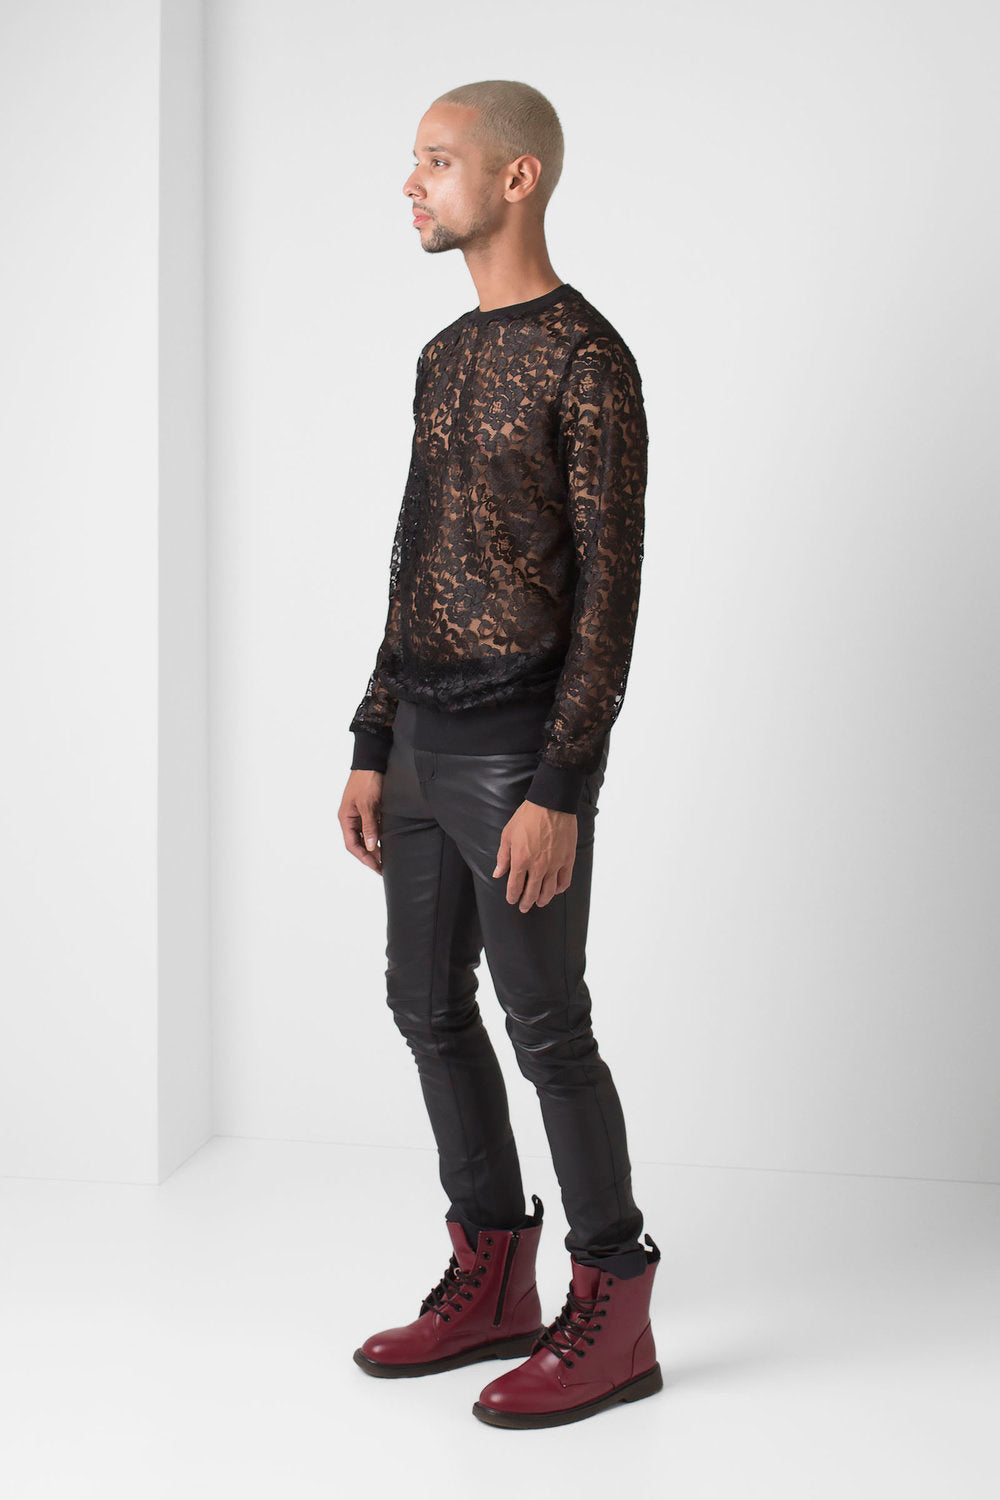 Black Lace Pullover - pacorogiene